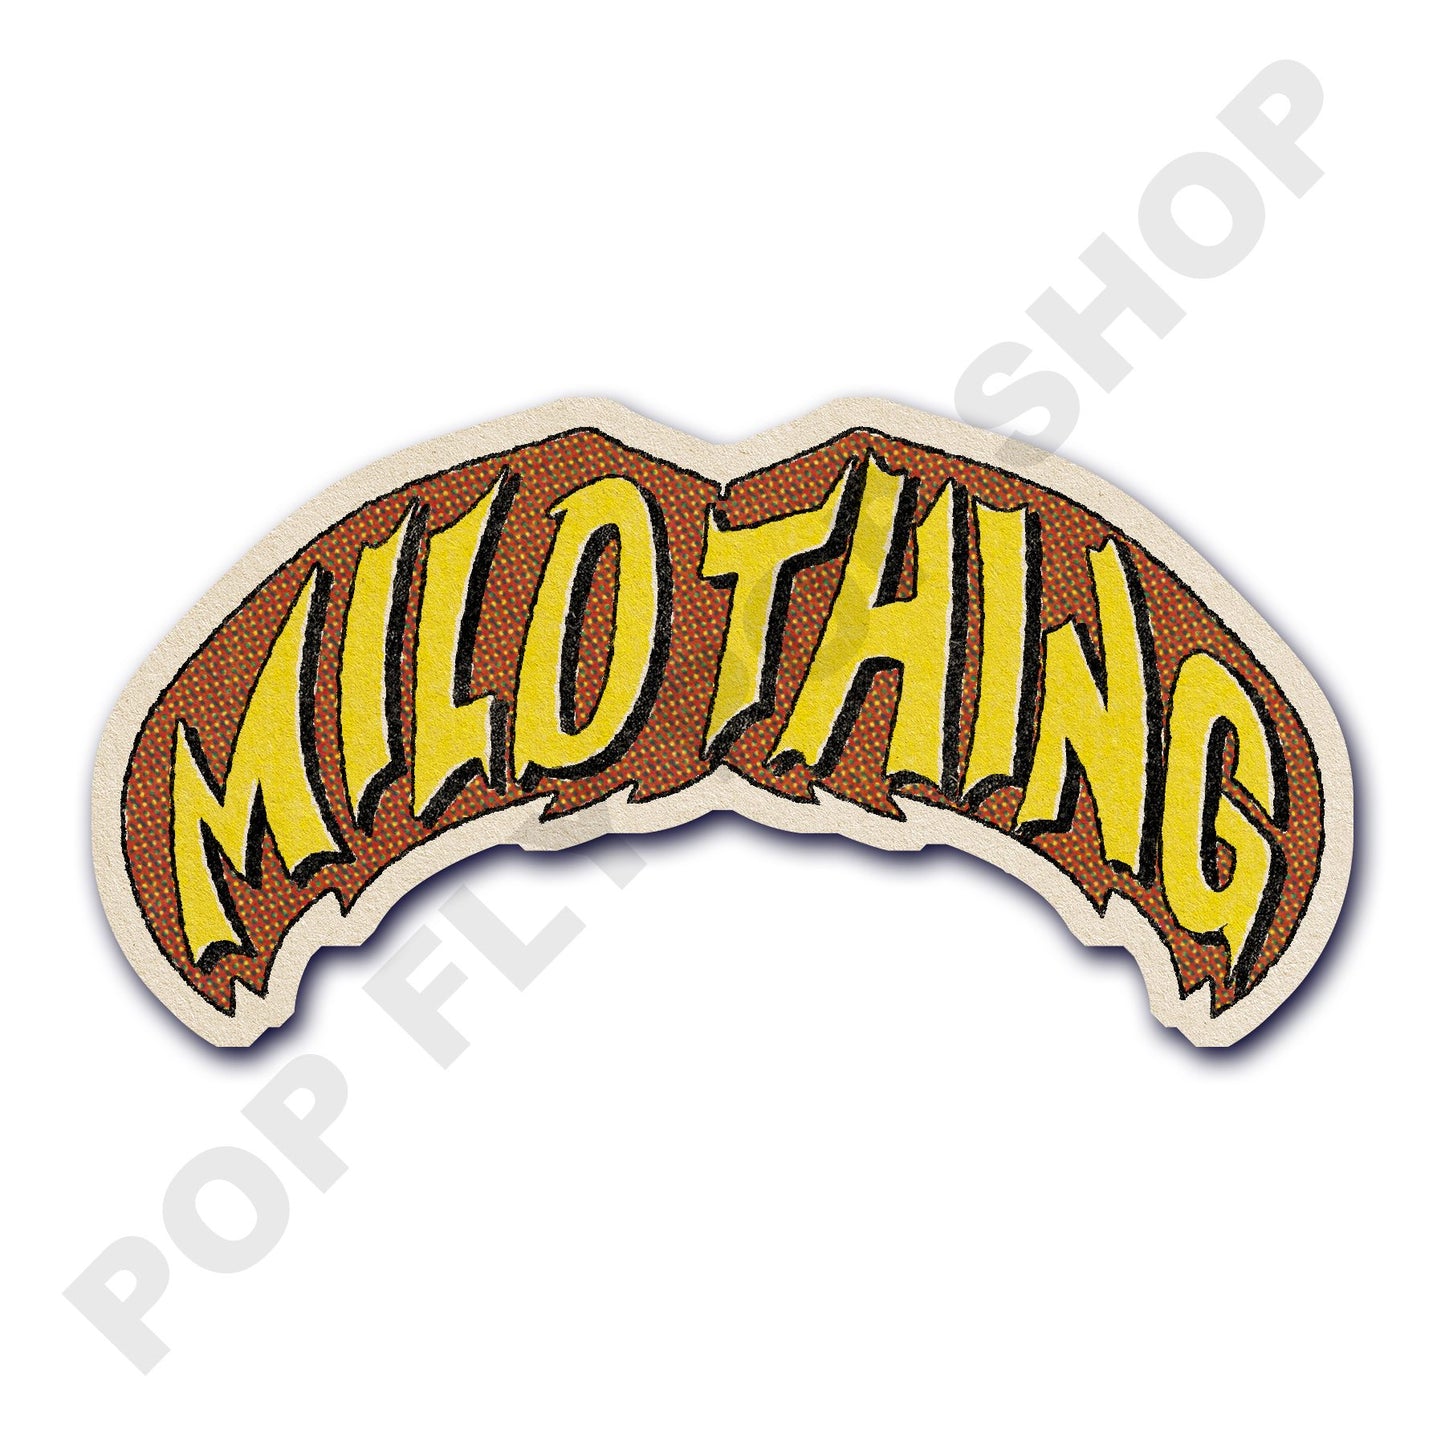 (SOLD OUT) "Mild Thing" Sticker